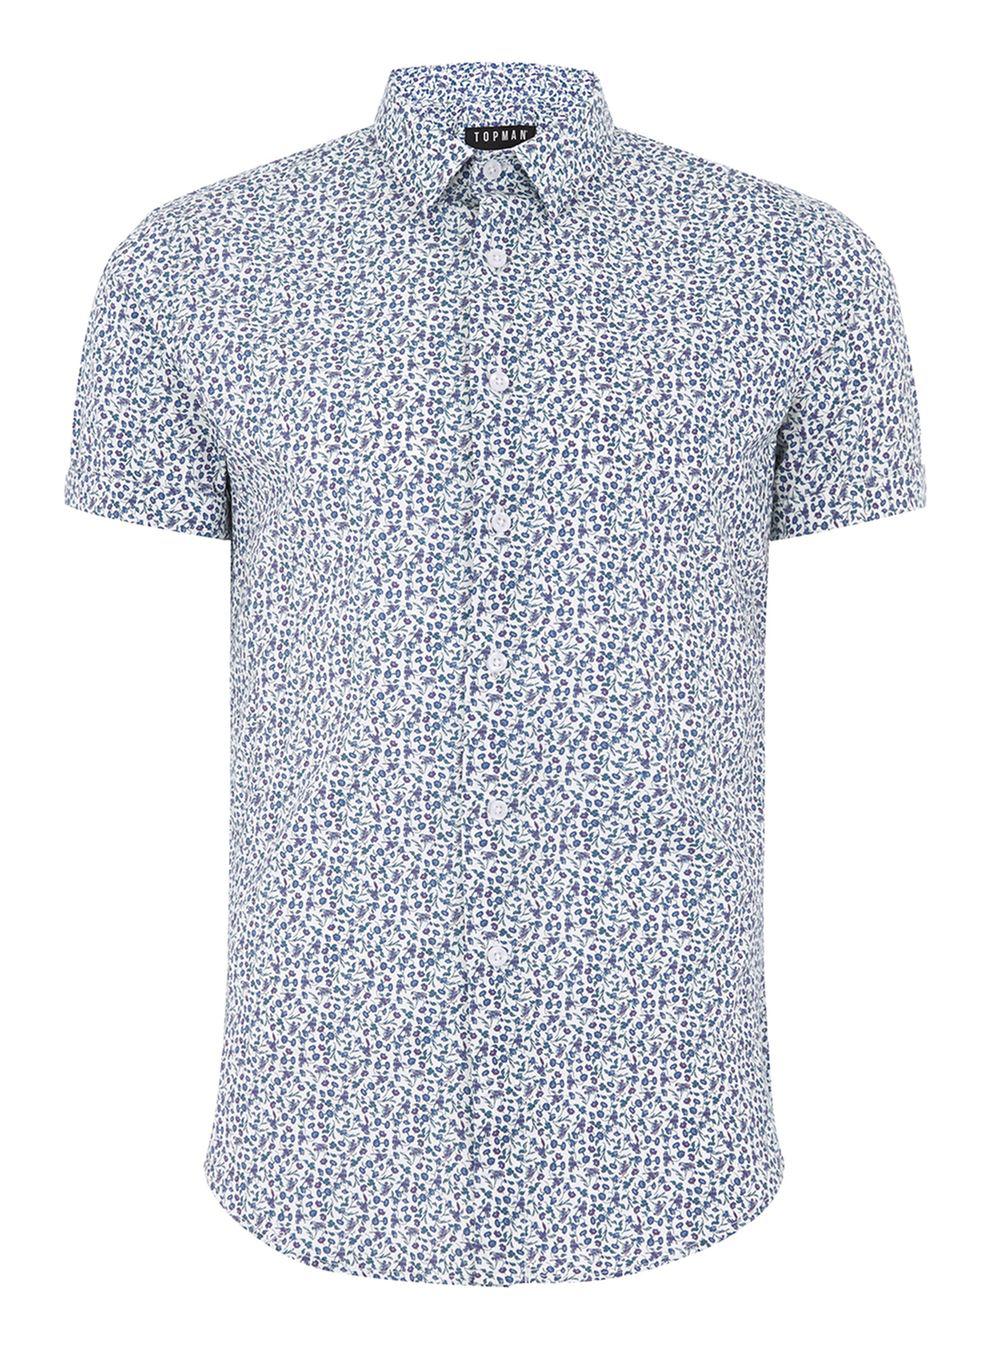 Lyst - Topman White And Blue Floral Shirt in Blue for Men